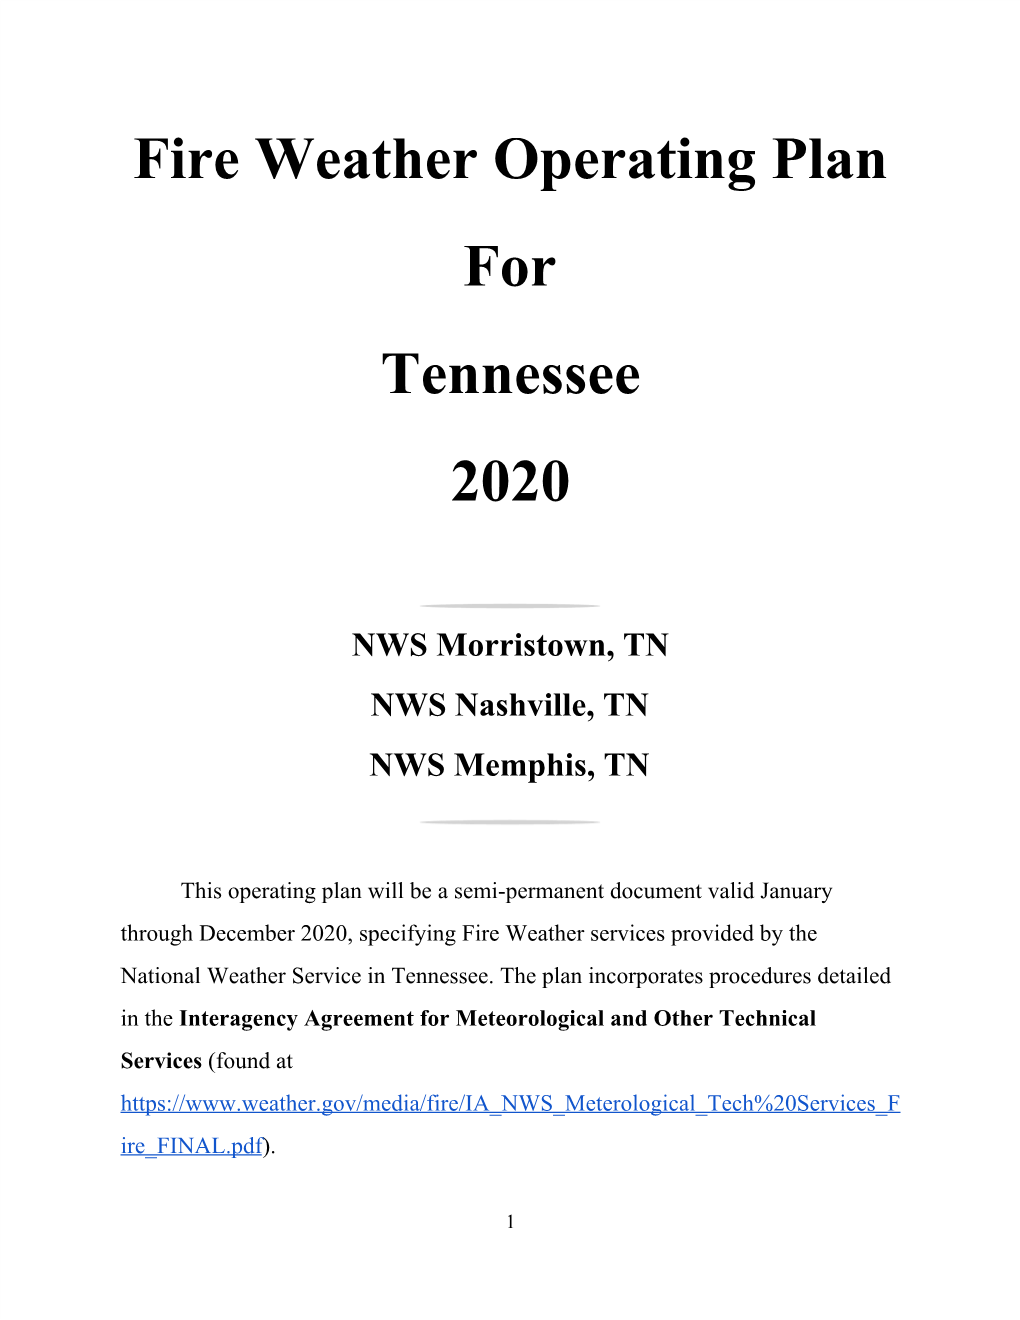 Fire Weather Operating Plan for Tennessee 2020